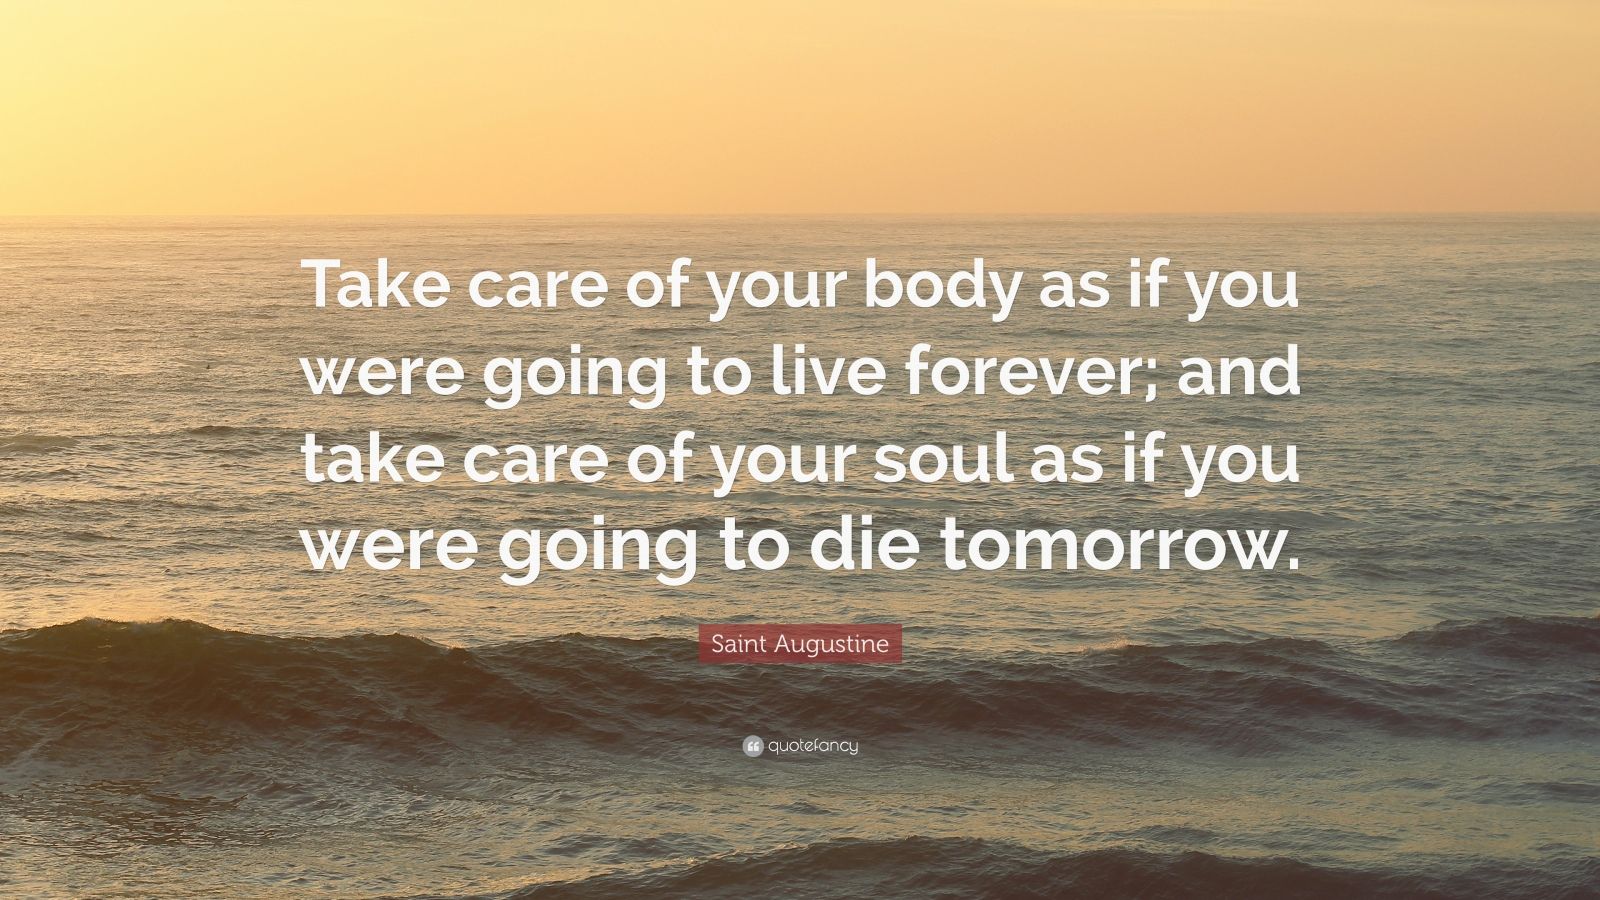 Saint Augustine Quote: “Take care of your body as if you were going to